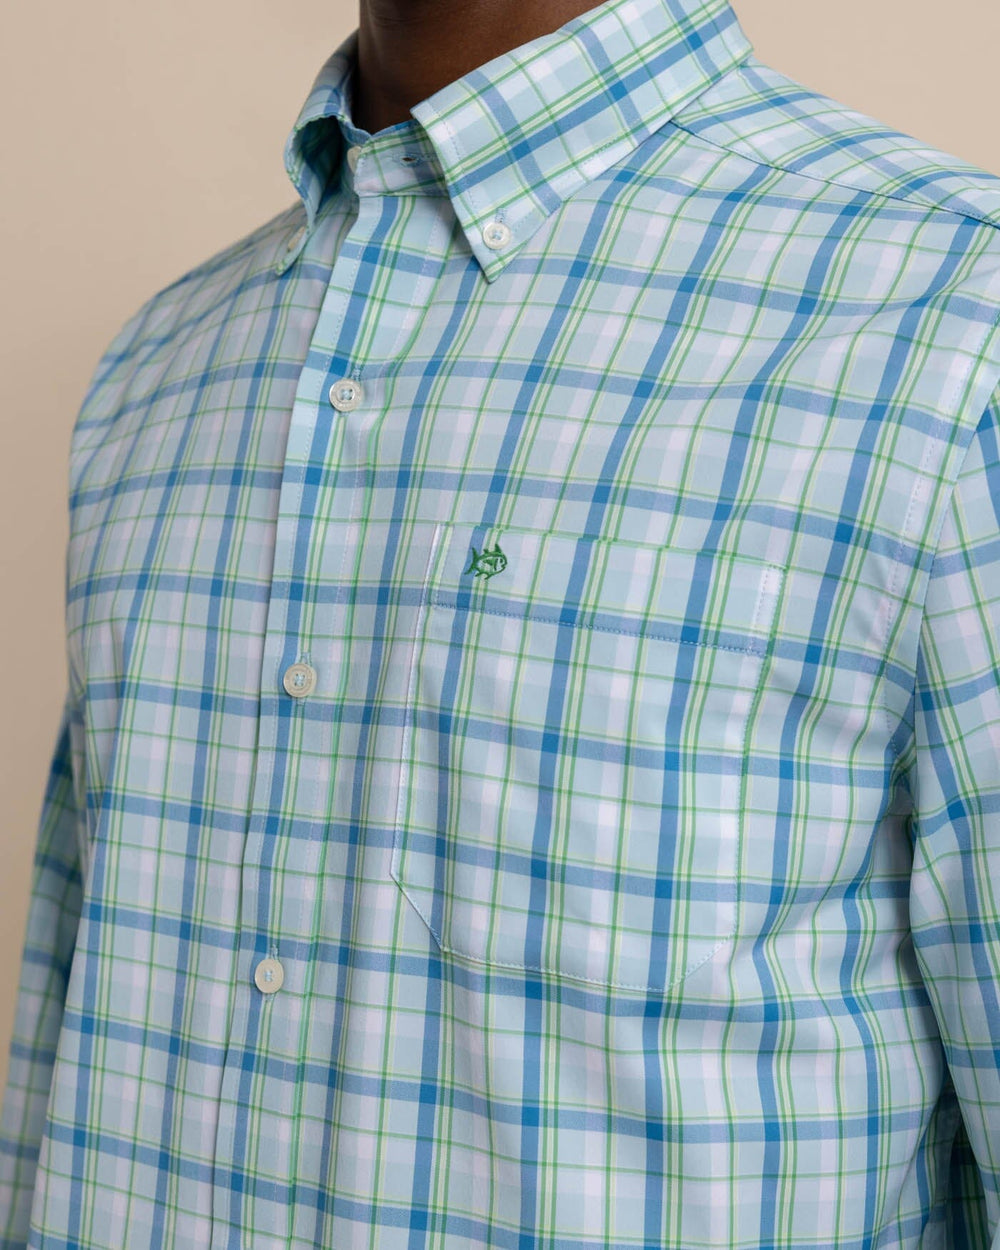 The detail view of the Southern Tide brrr Whalehead Plaid Intercoastal Sport Shirt by Southern Tide - Chilled Blue